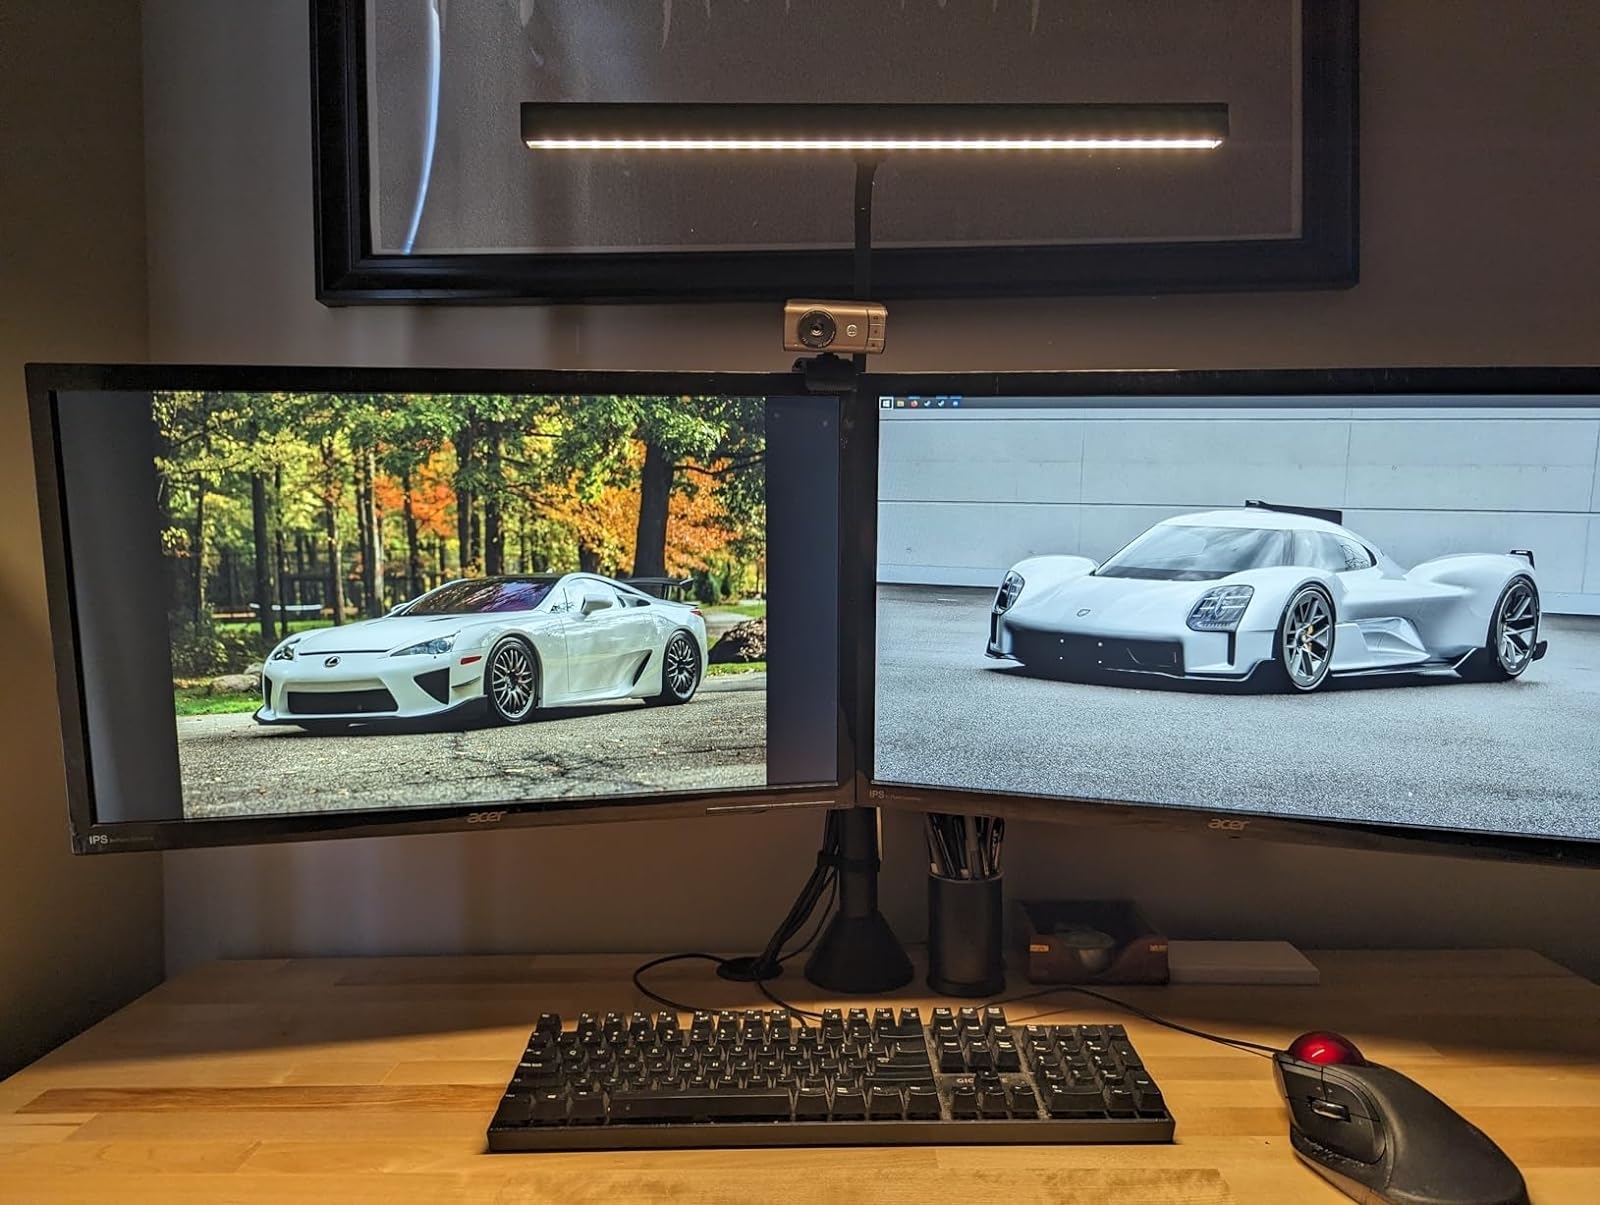 Dual monitors displaying sports cars, one in nature and one in a showroom, on a desk with a keyboard and mouse